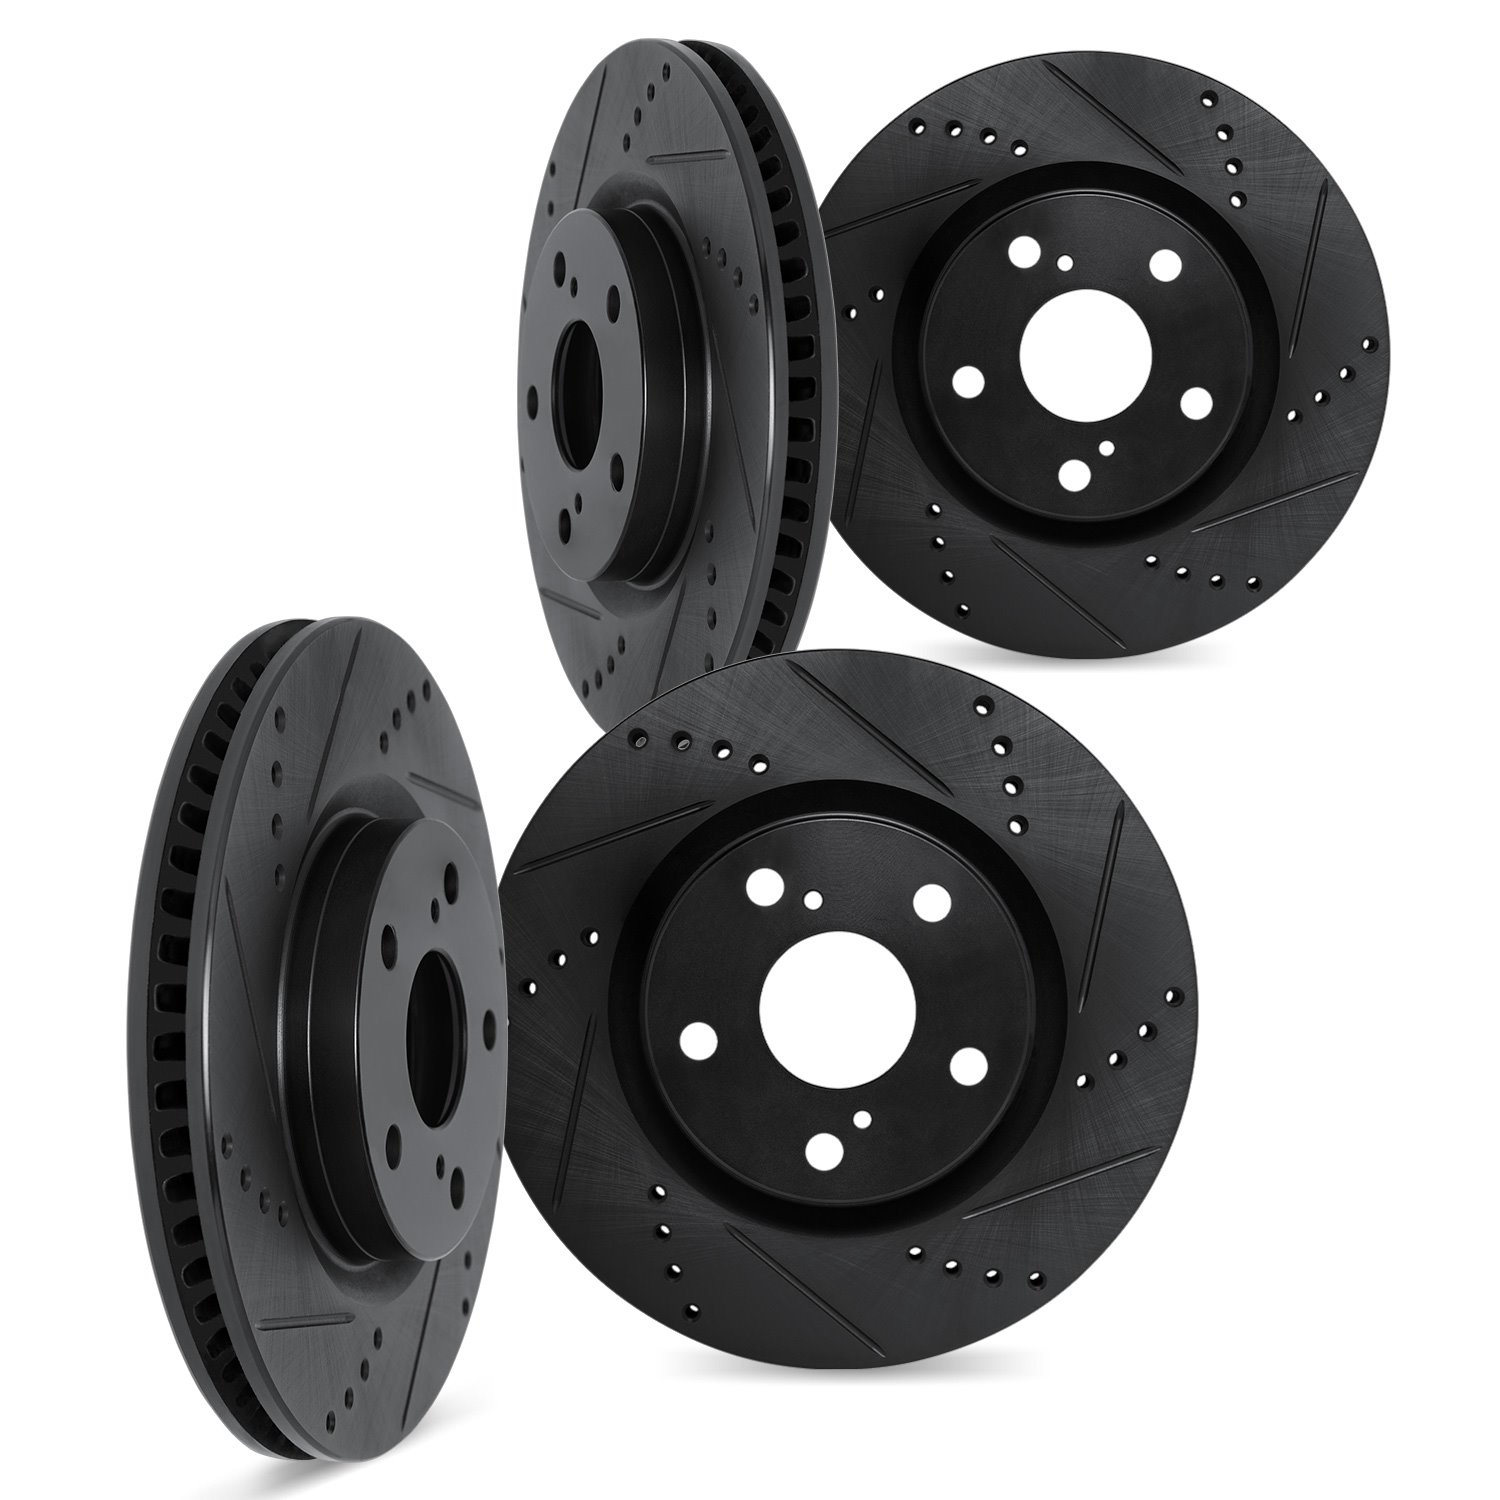 8004-67109 Drilled/Slotted Brake Rotors [Black], Fits Select Infiniti/Nissan, Position: Front and Rear